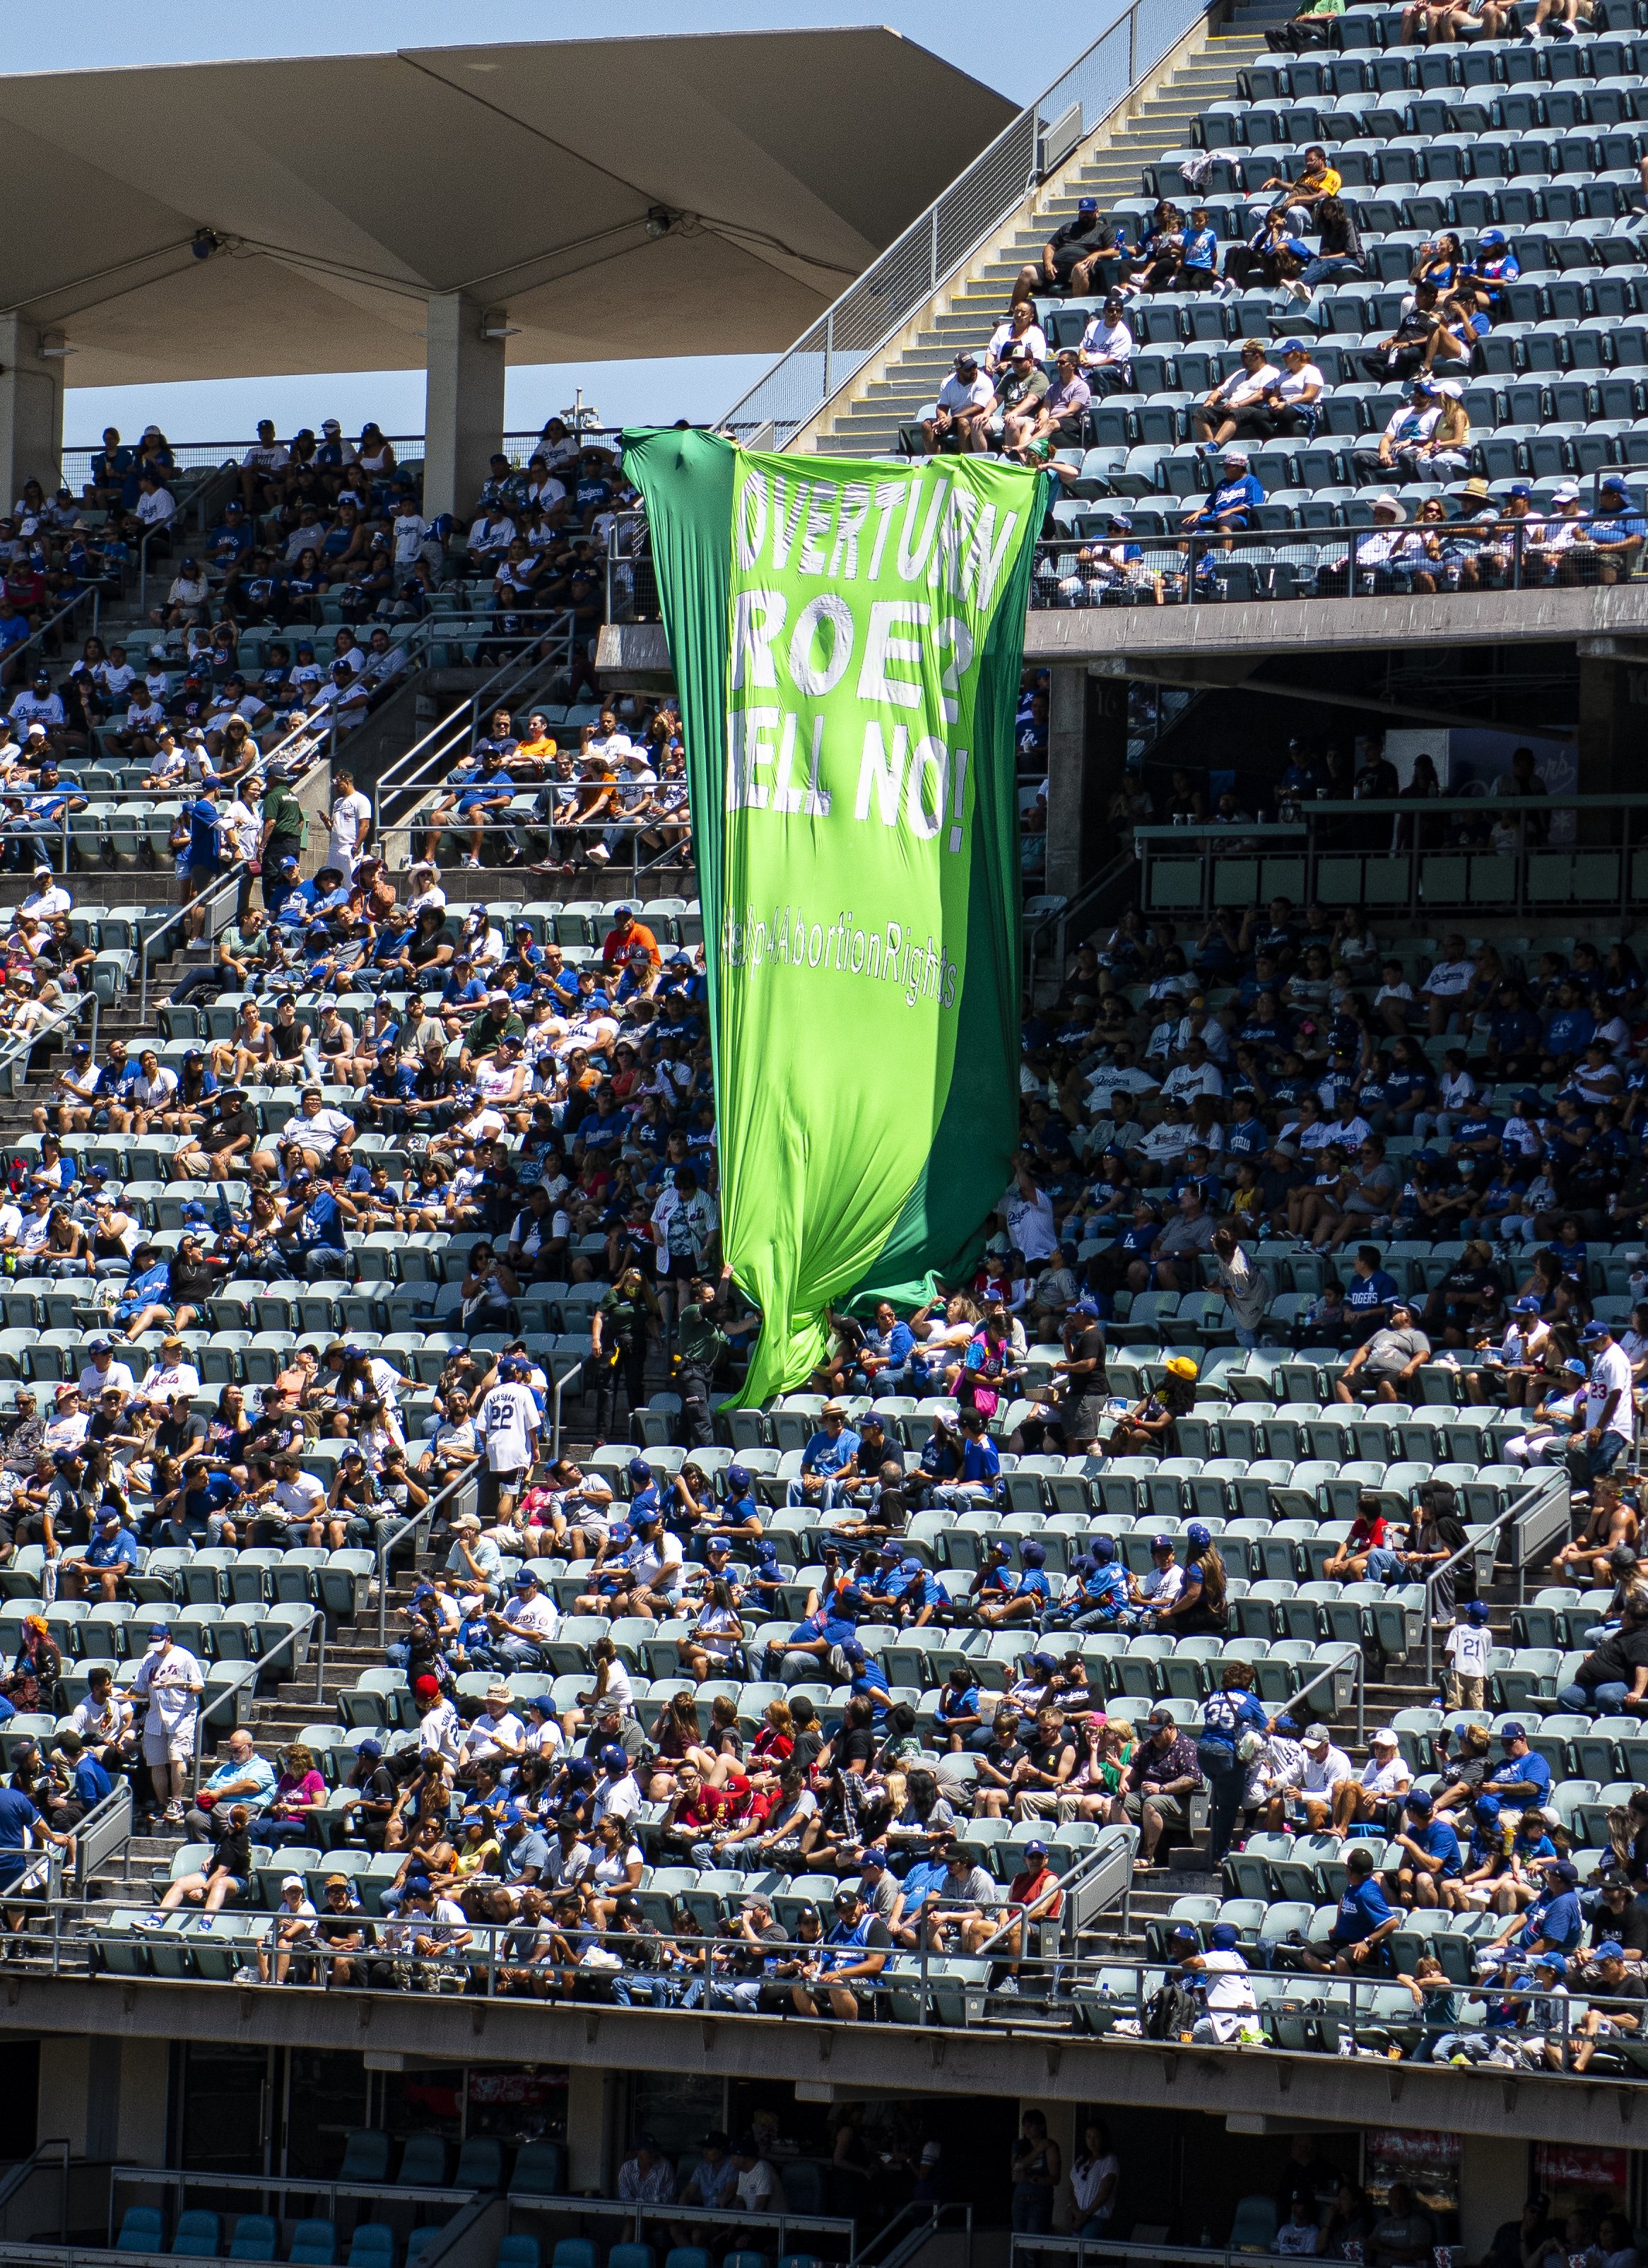  Rise Up for Abortion Rights members unfurl a large "Overturn Roe Hell No" banner during the 1:00 game vs. the New York Mets at Dodger Stadium Sunday, June 5. (Jon Putman | The Corsair) 